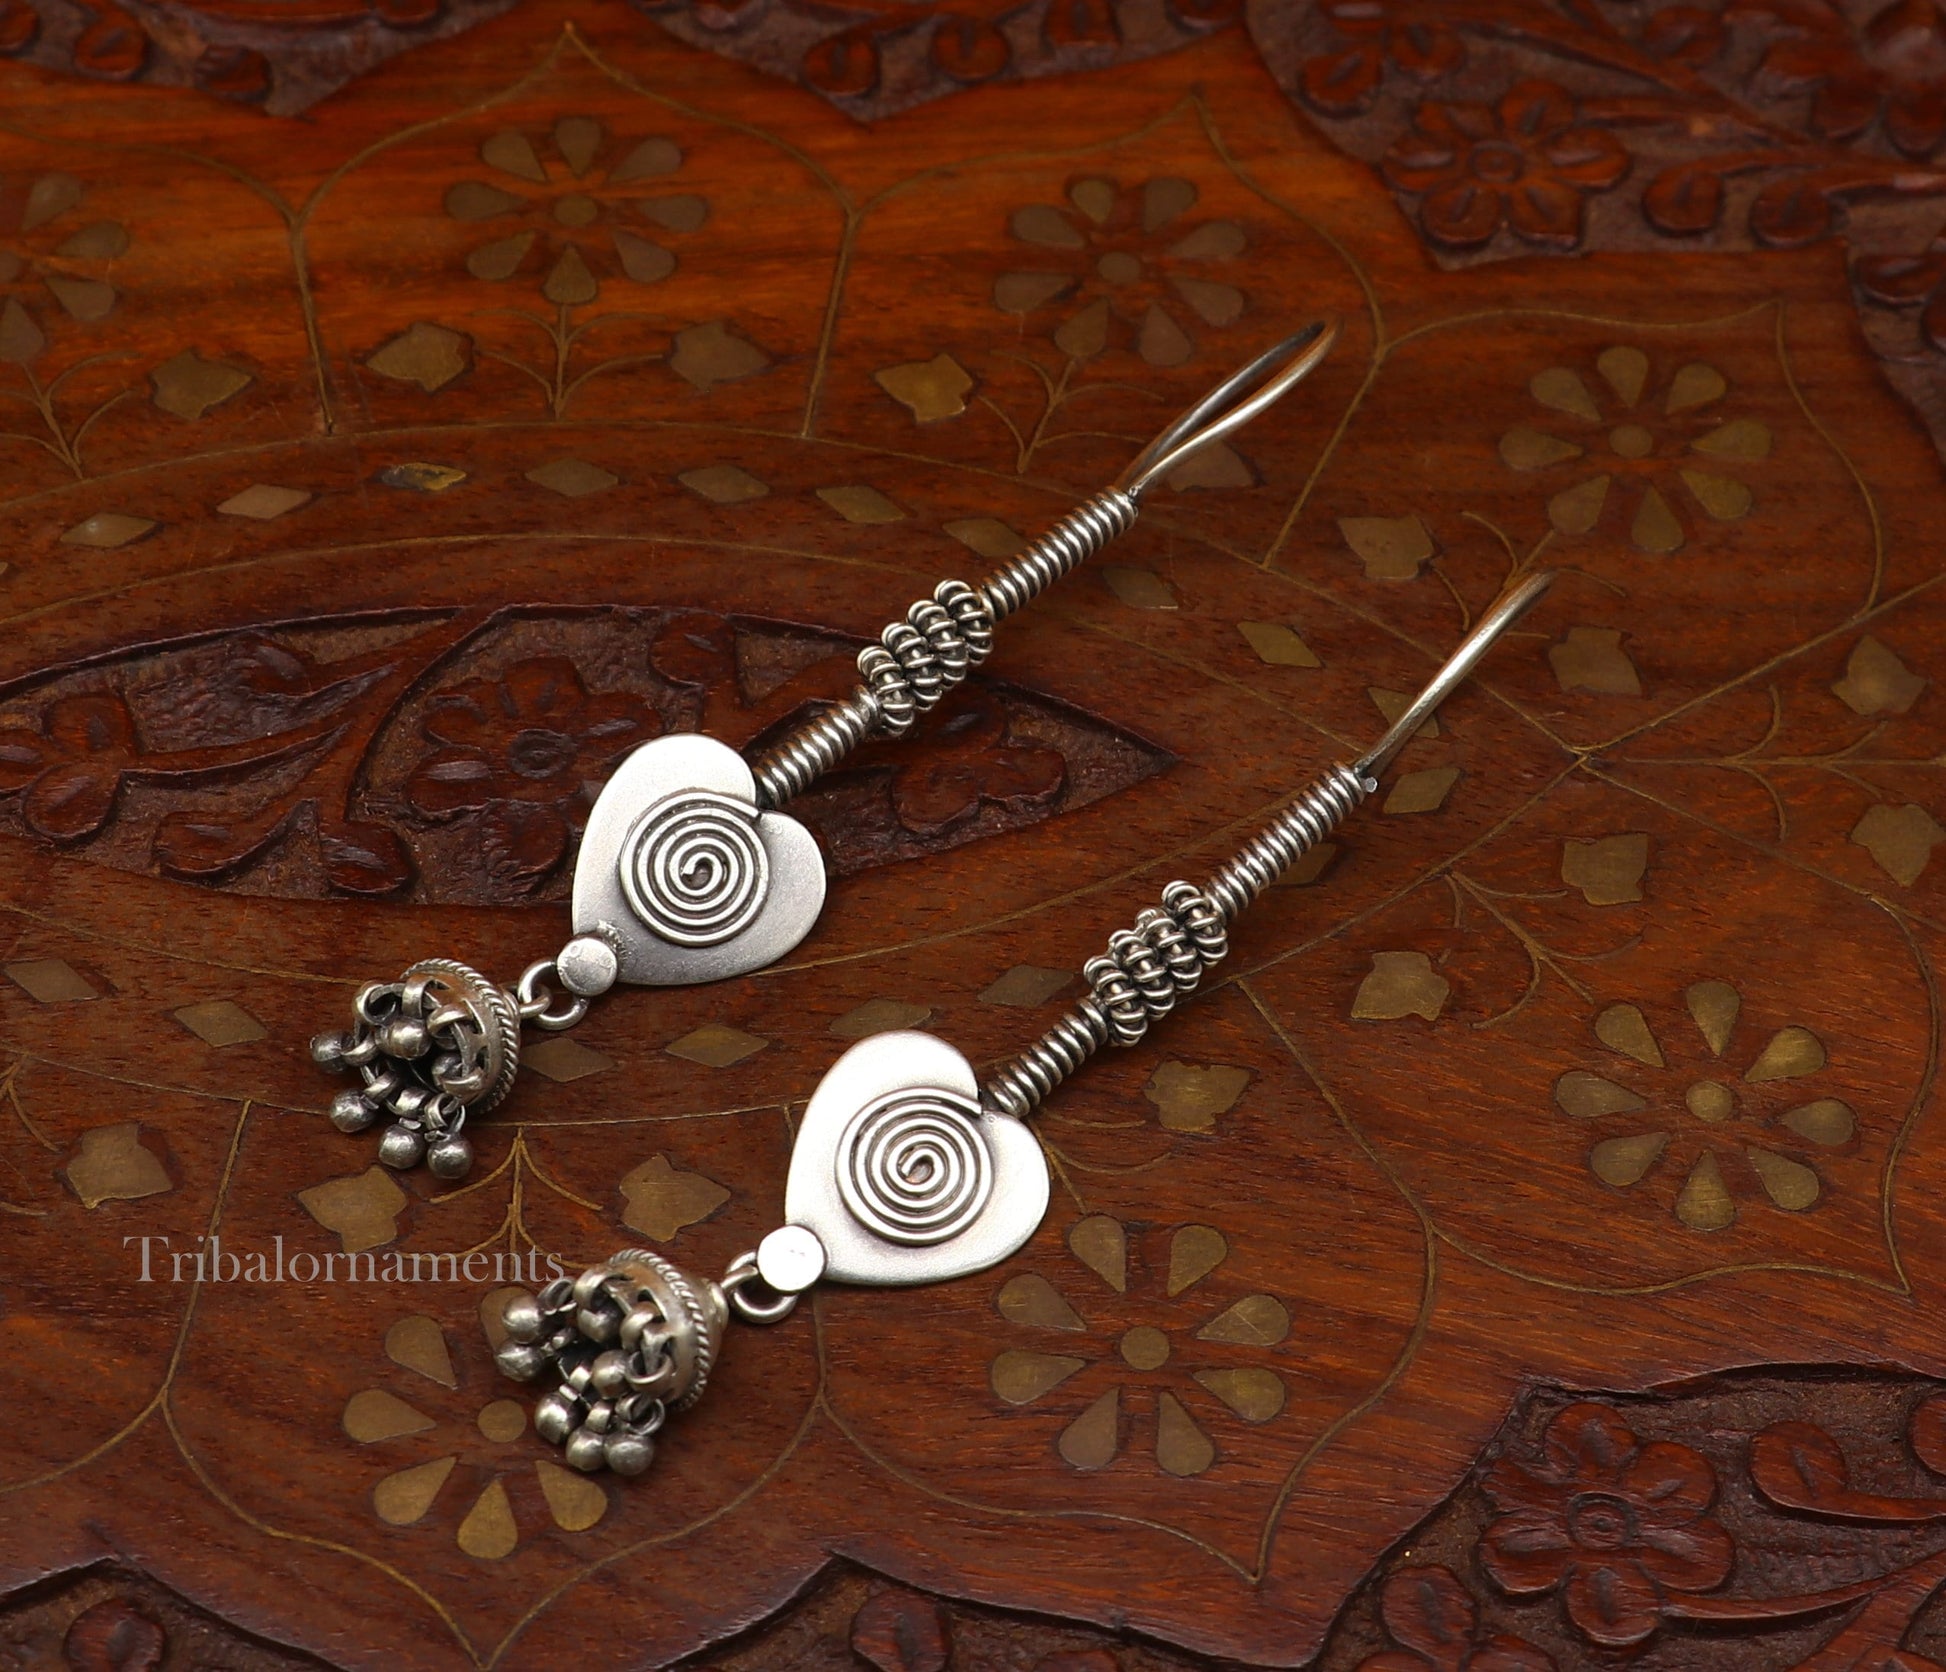 92.5 Sterling silver handmade charm hoops earring jhumka, excellent customized best gift for brides girls ethnic tribal jewelry ear980 - TRIBAL ORNAMENTS